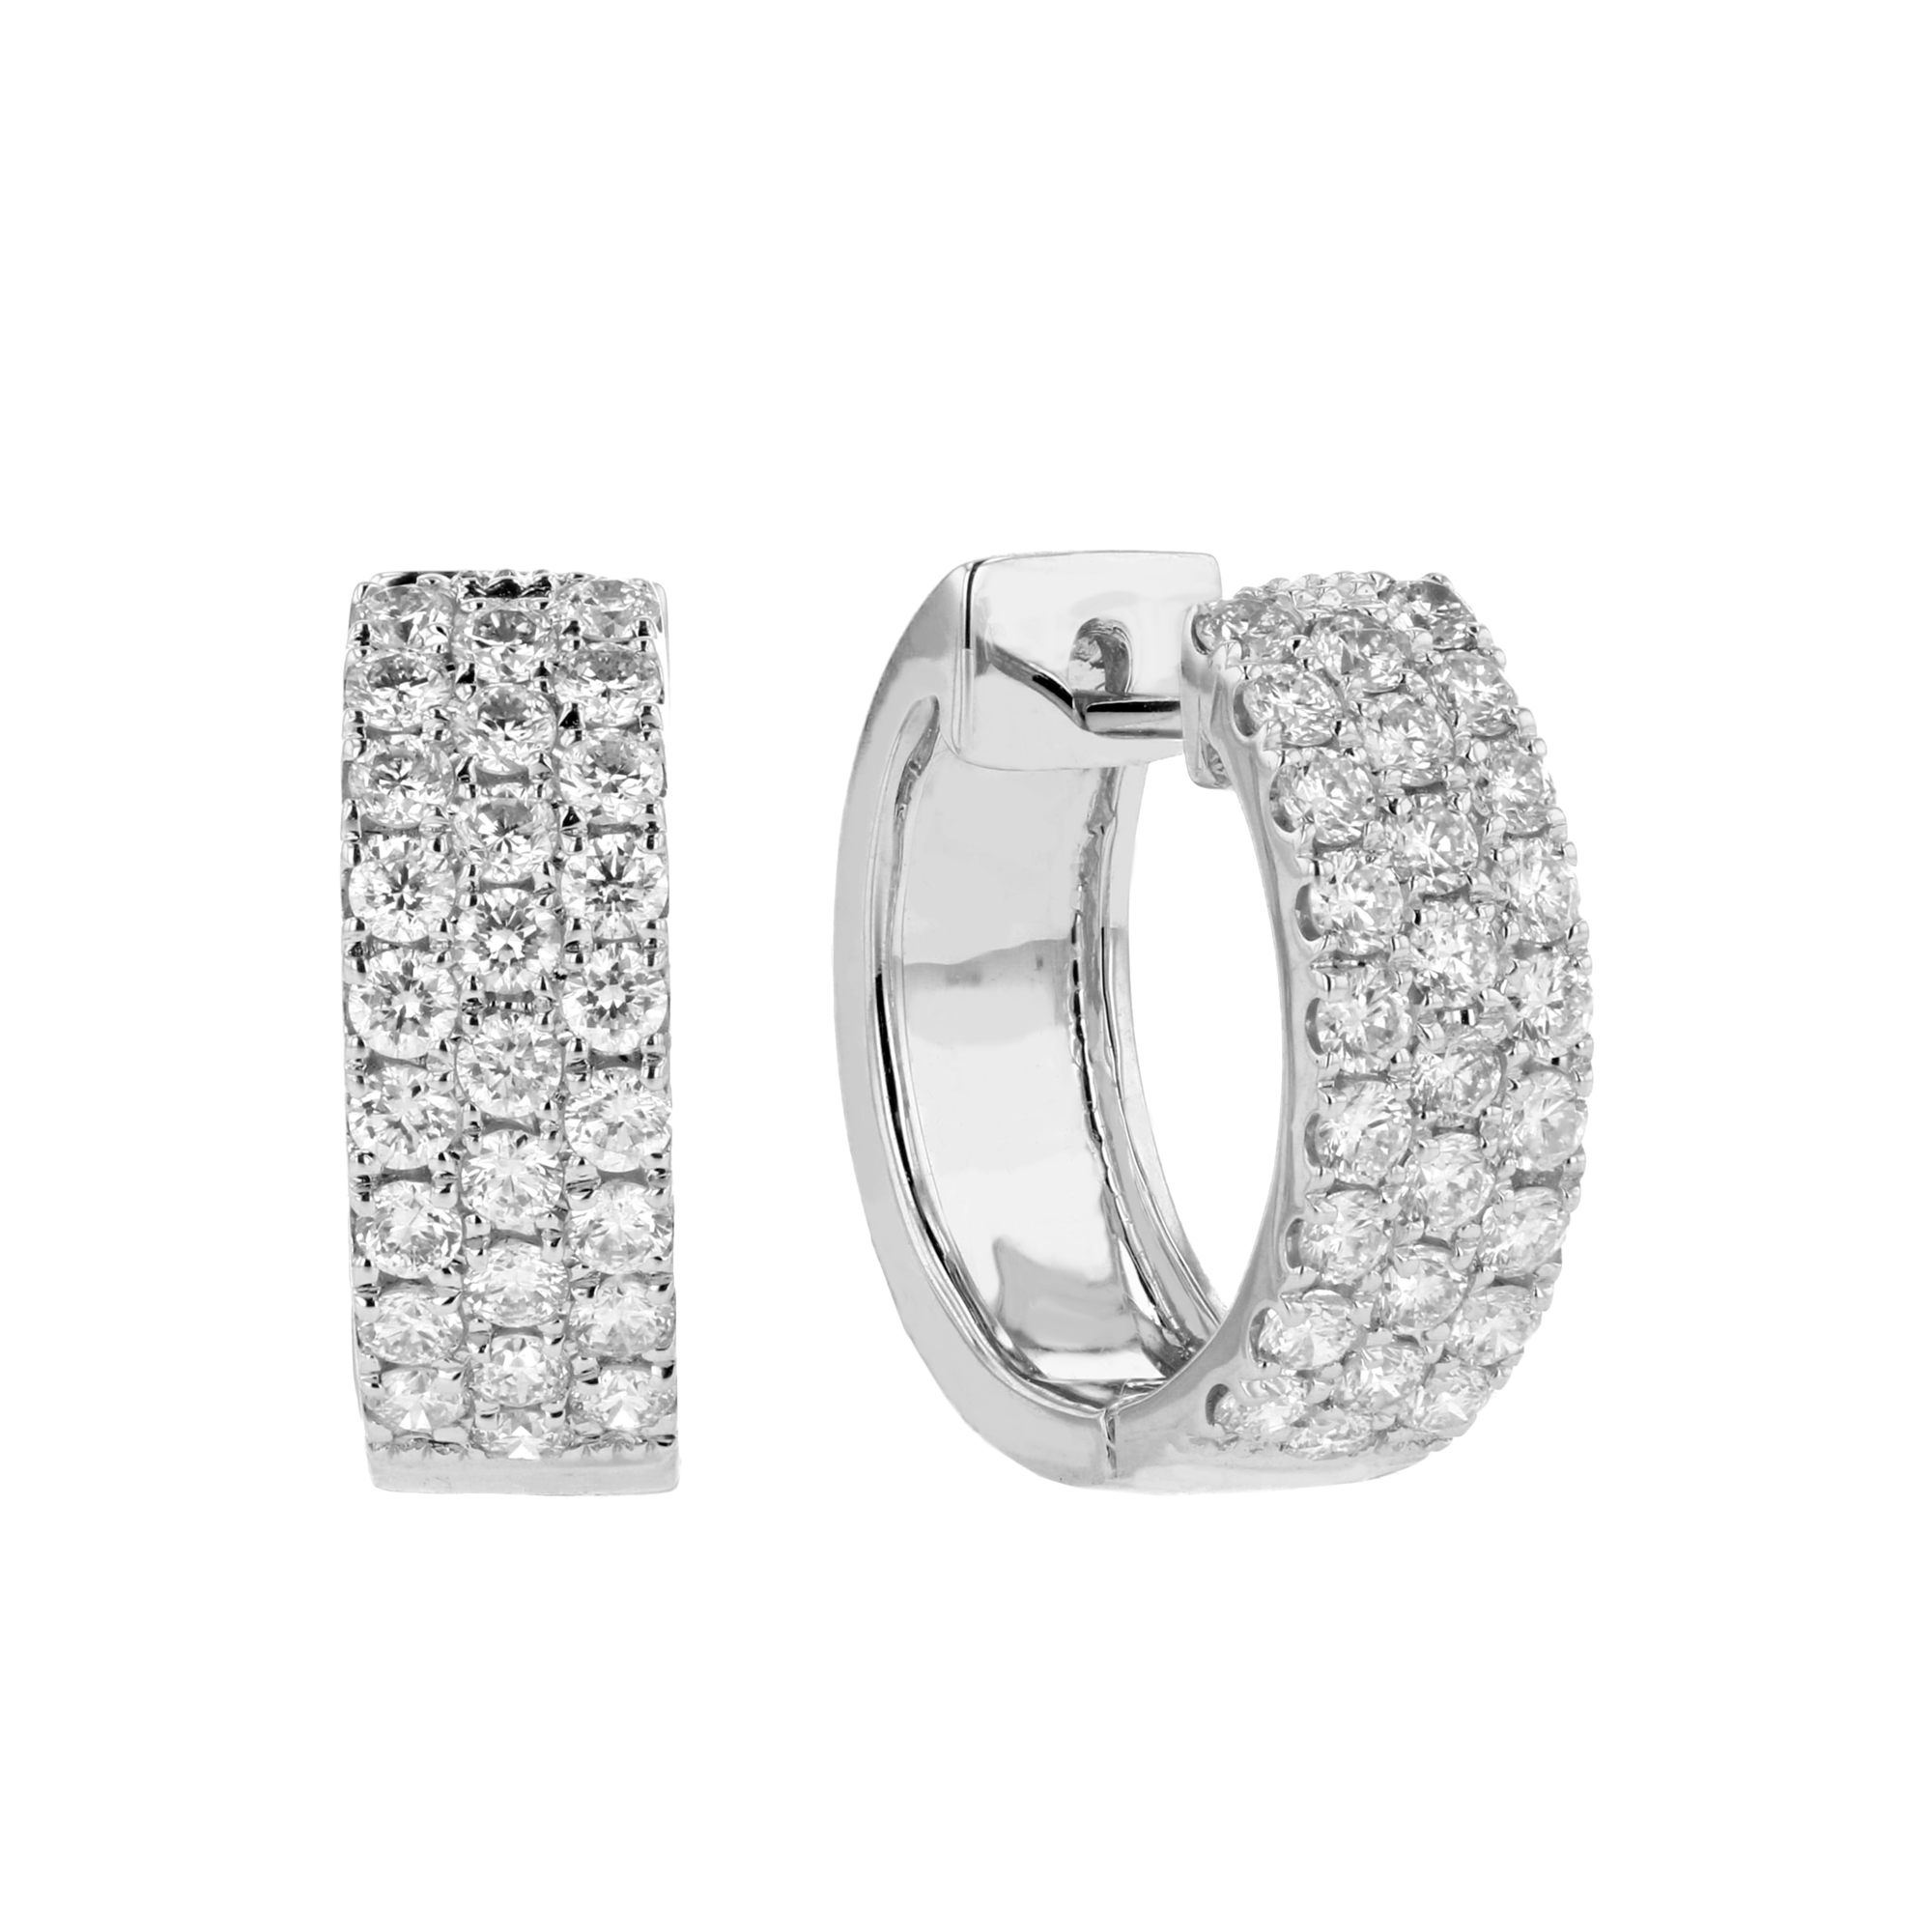 View 0.62ctw Diamond Hoops in 18k White Gold